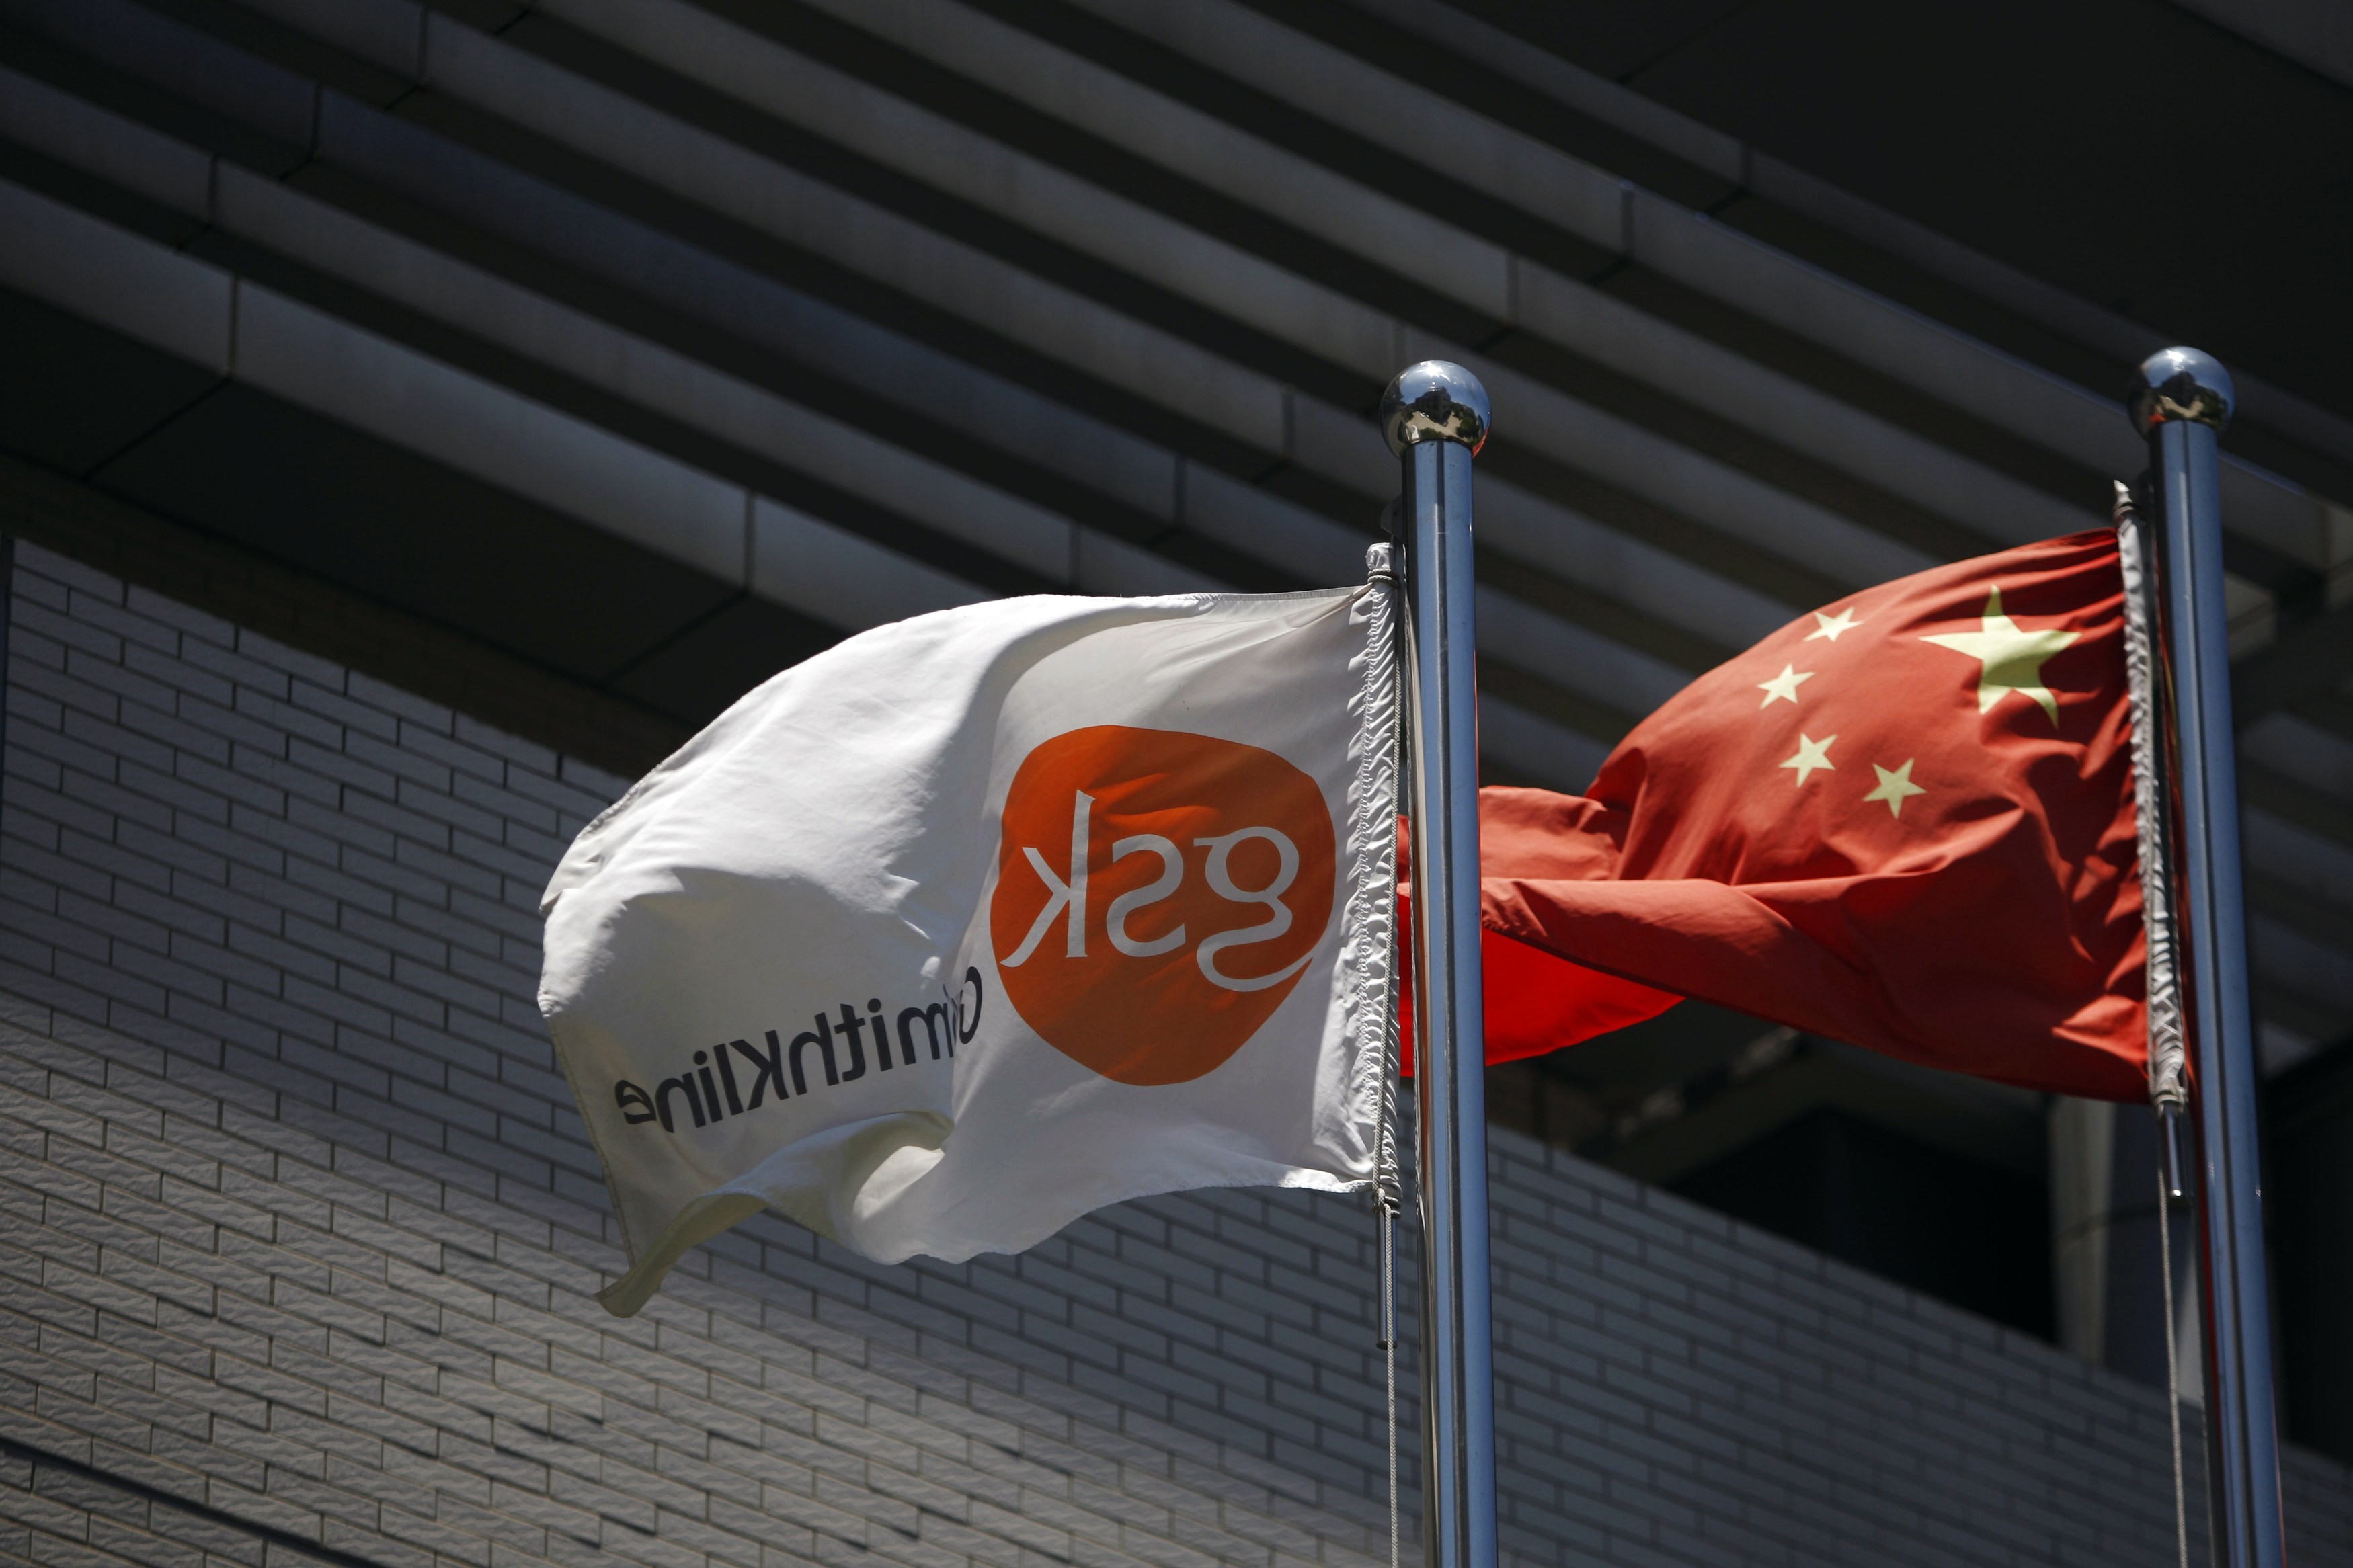 A judge in the United States has dismissed a lawsuit by two former corporate investigators who accused British pharmaceutical company GlaxoSmithKline of misleading them into investigating a whistle-blower in China. Photo: Xinhua